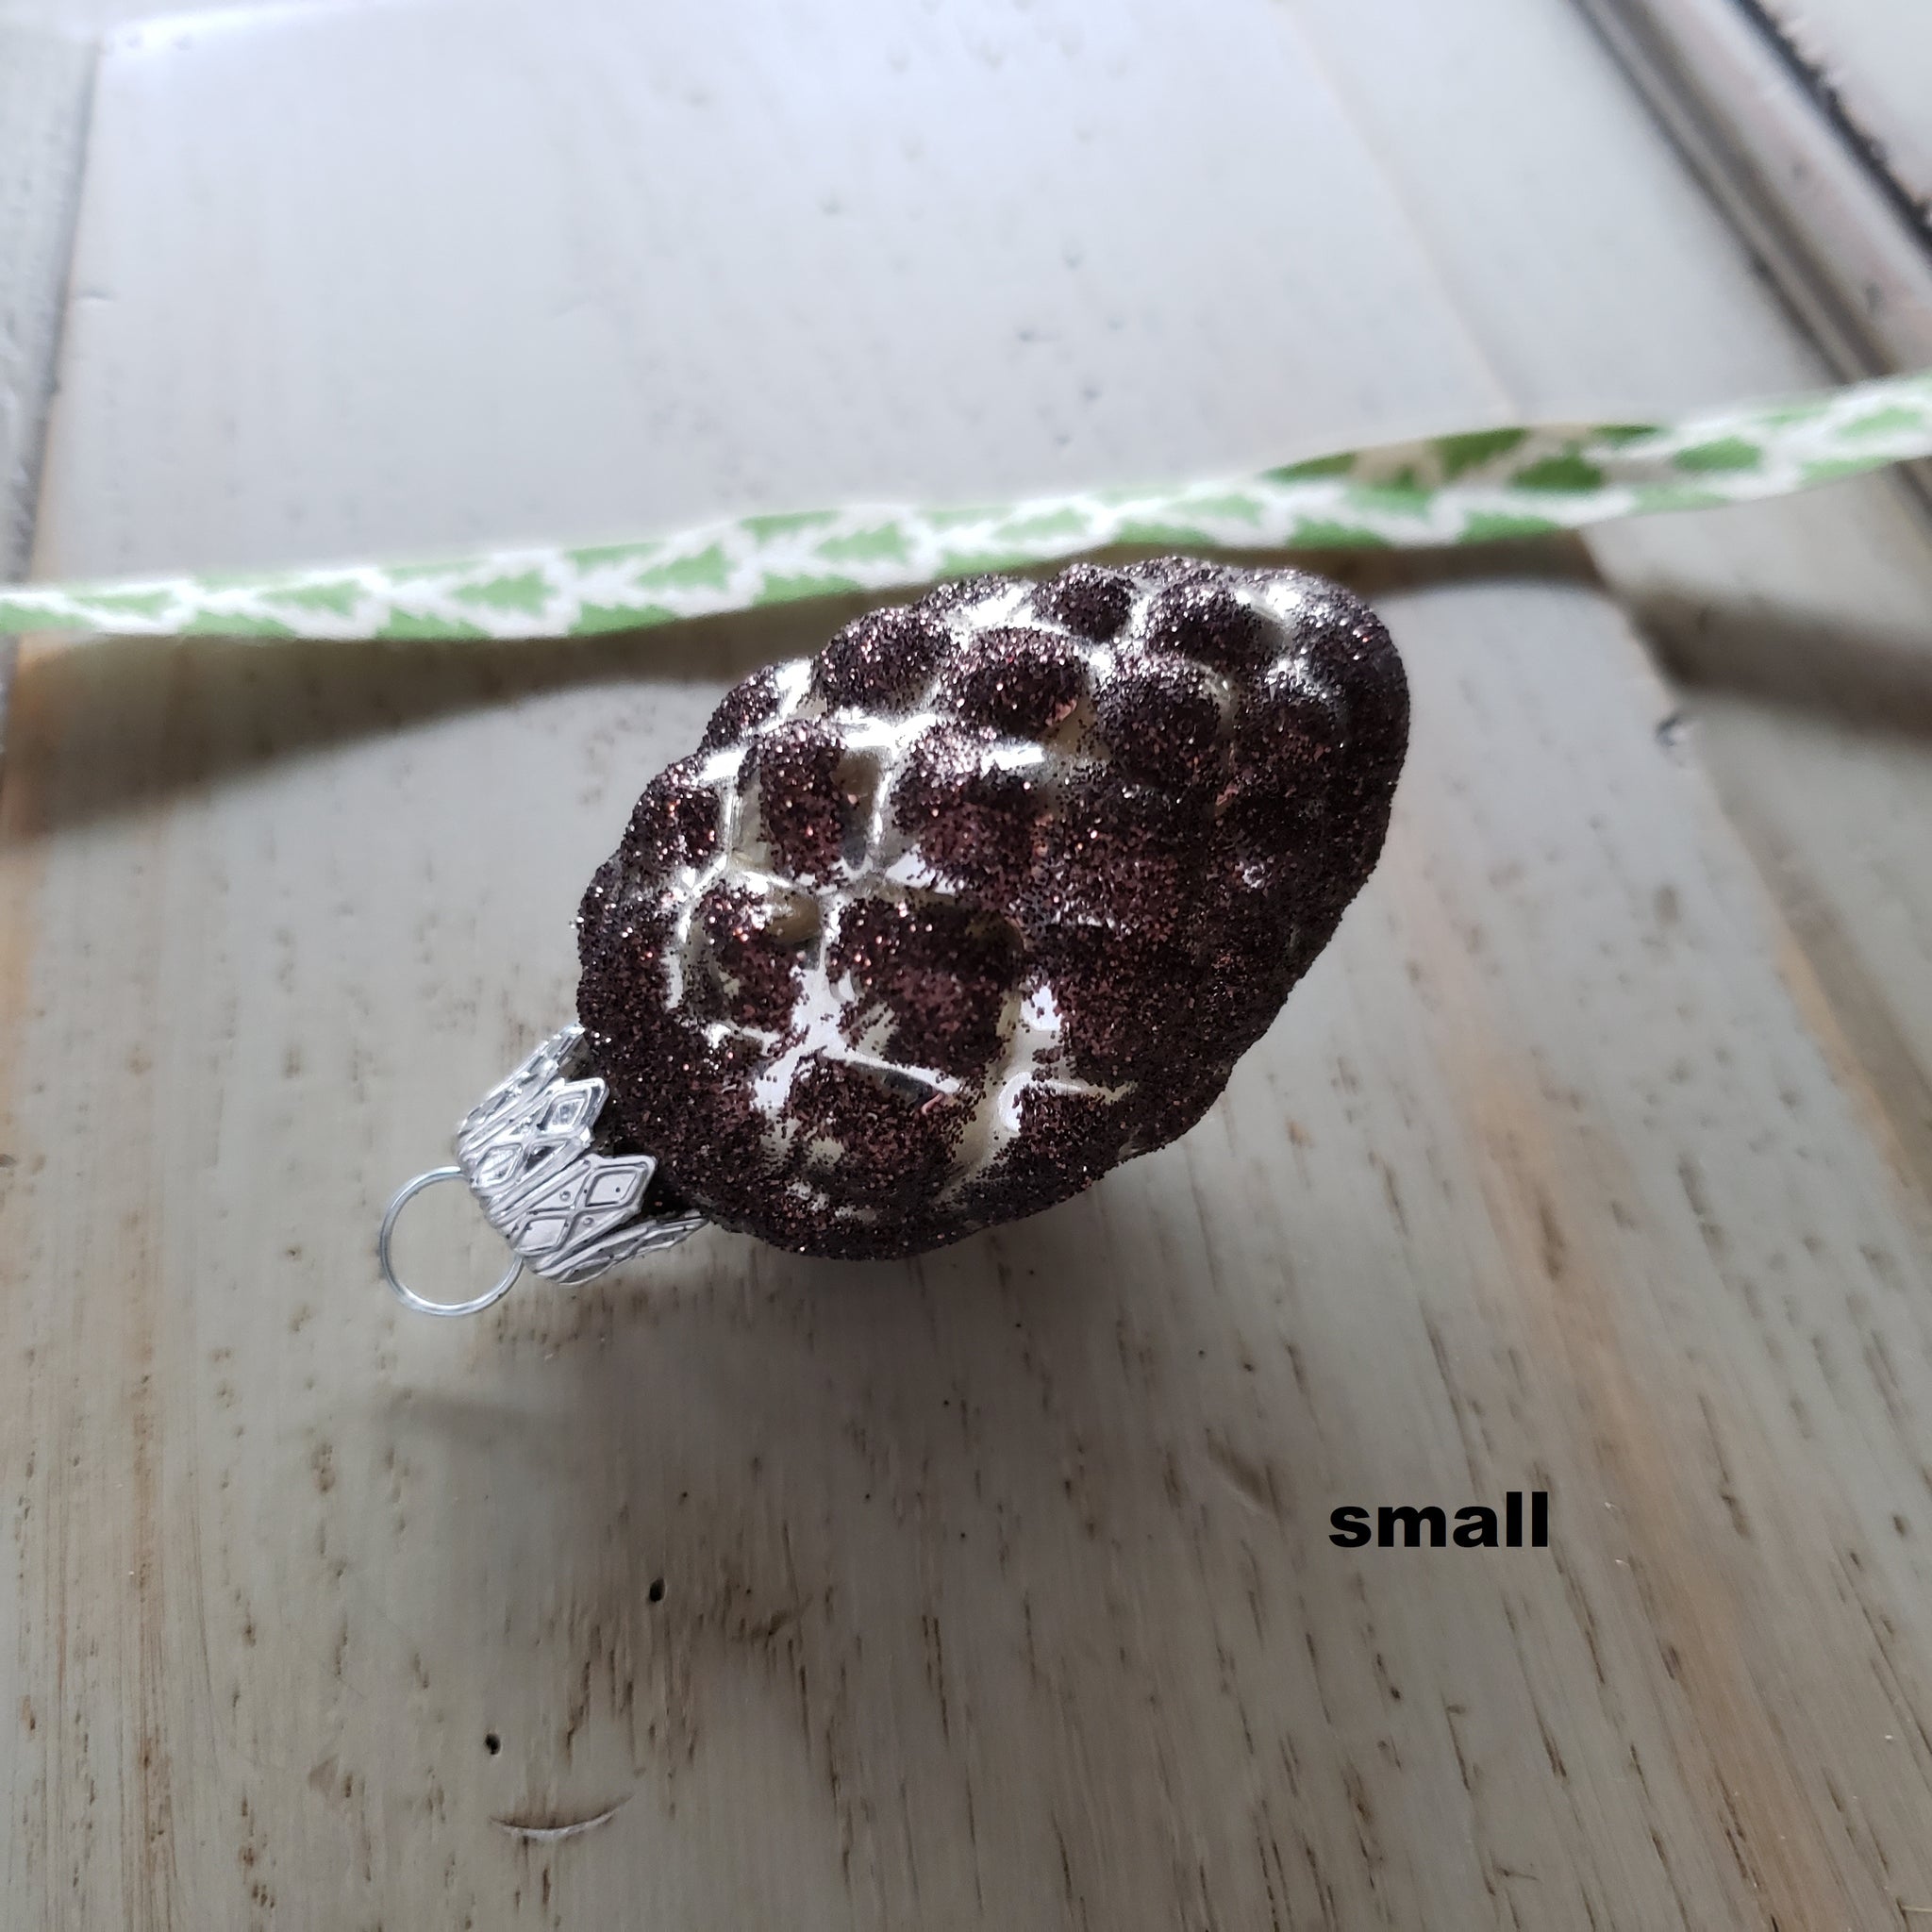 Mini Pine Cone Glass Ornament - Woodland glass ornament handcrafted in Europe, where Old World Christmas ornament making has a long tradition.